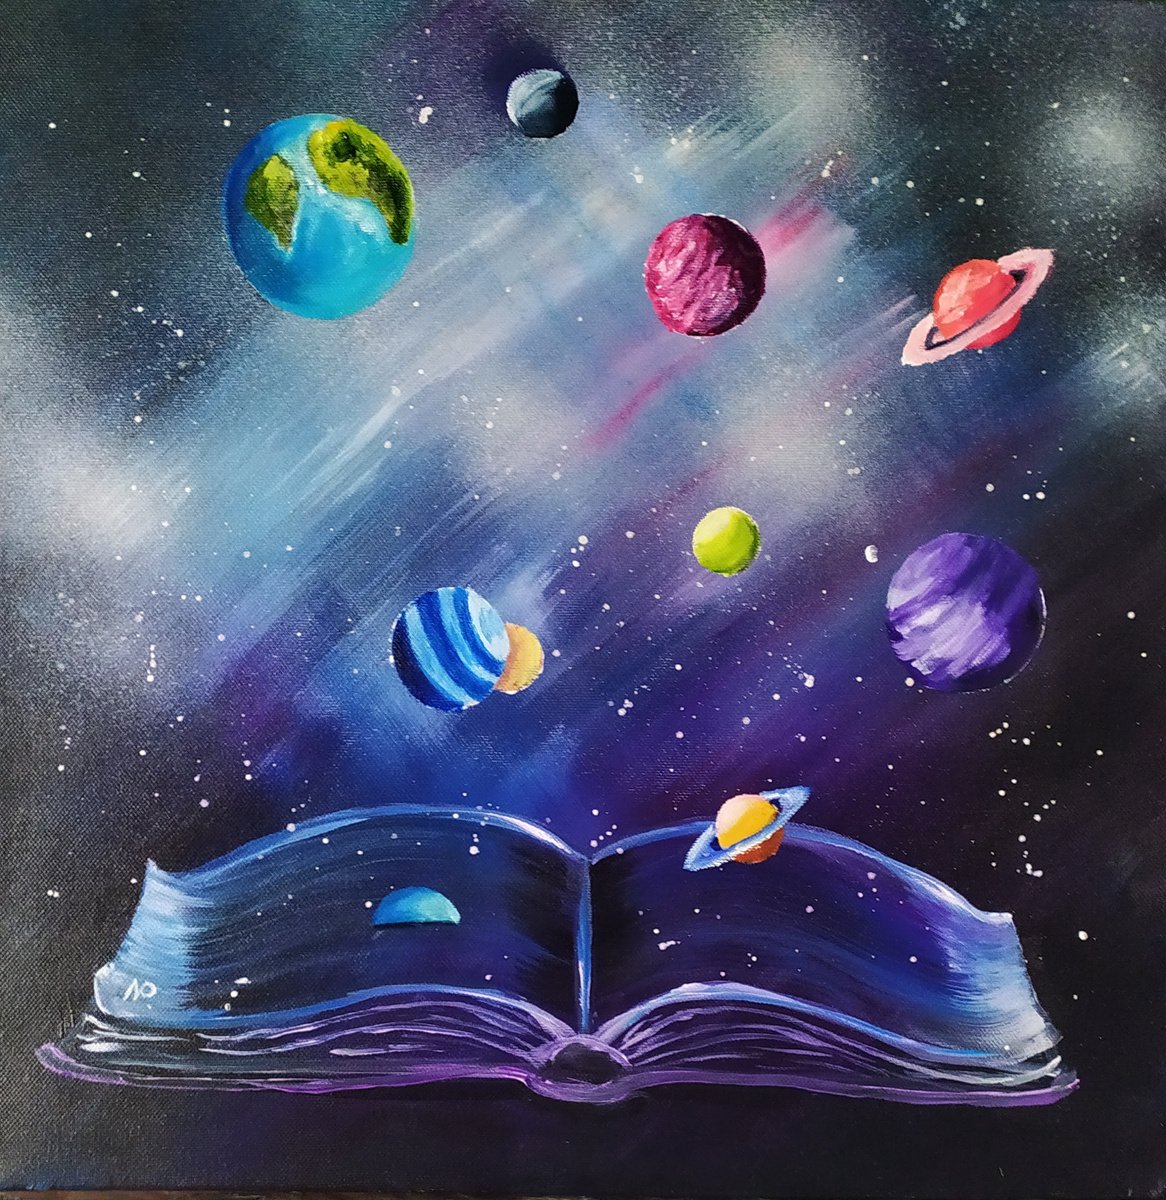 The book of Universe, original space painting, surrealistic art, bedroom decor, gift idea by Nataliia Plakhotnyk